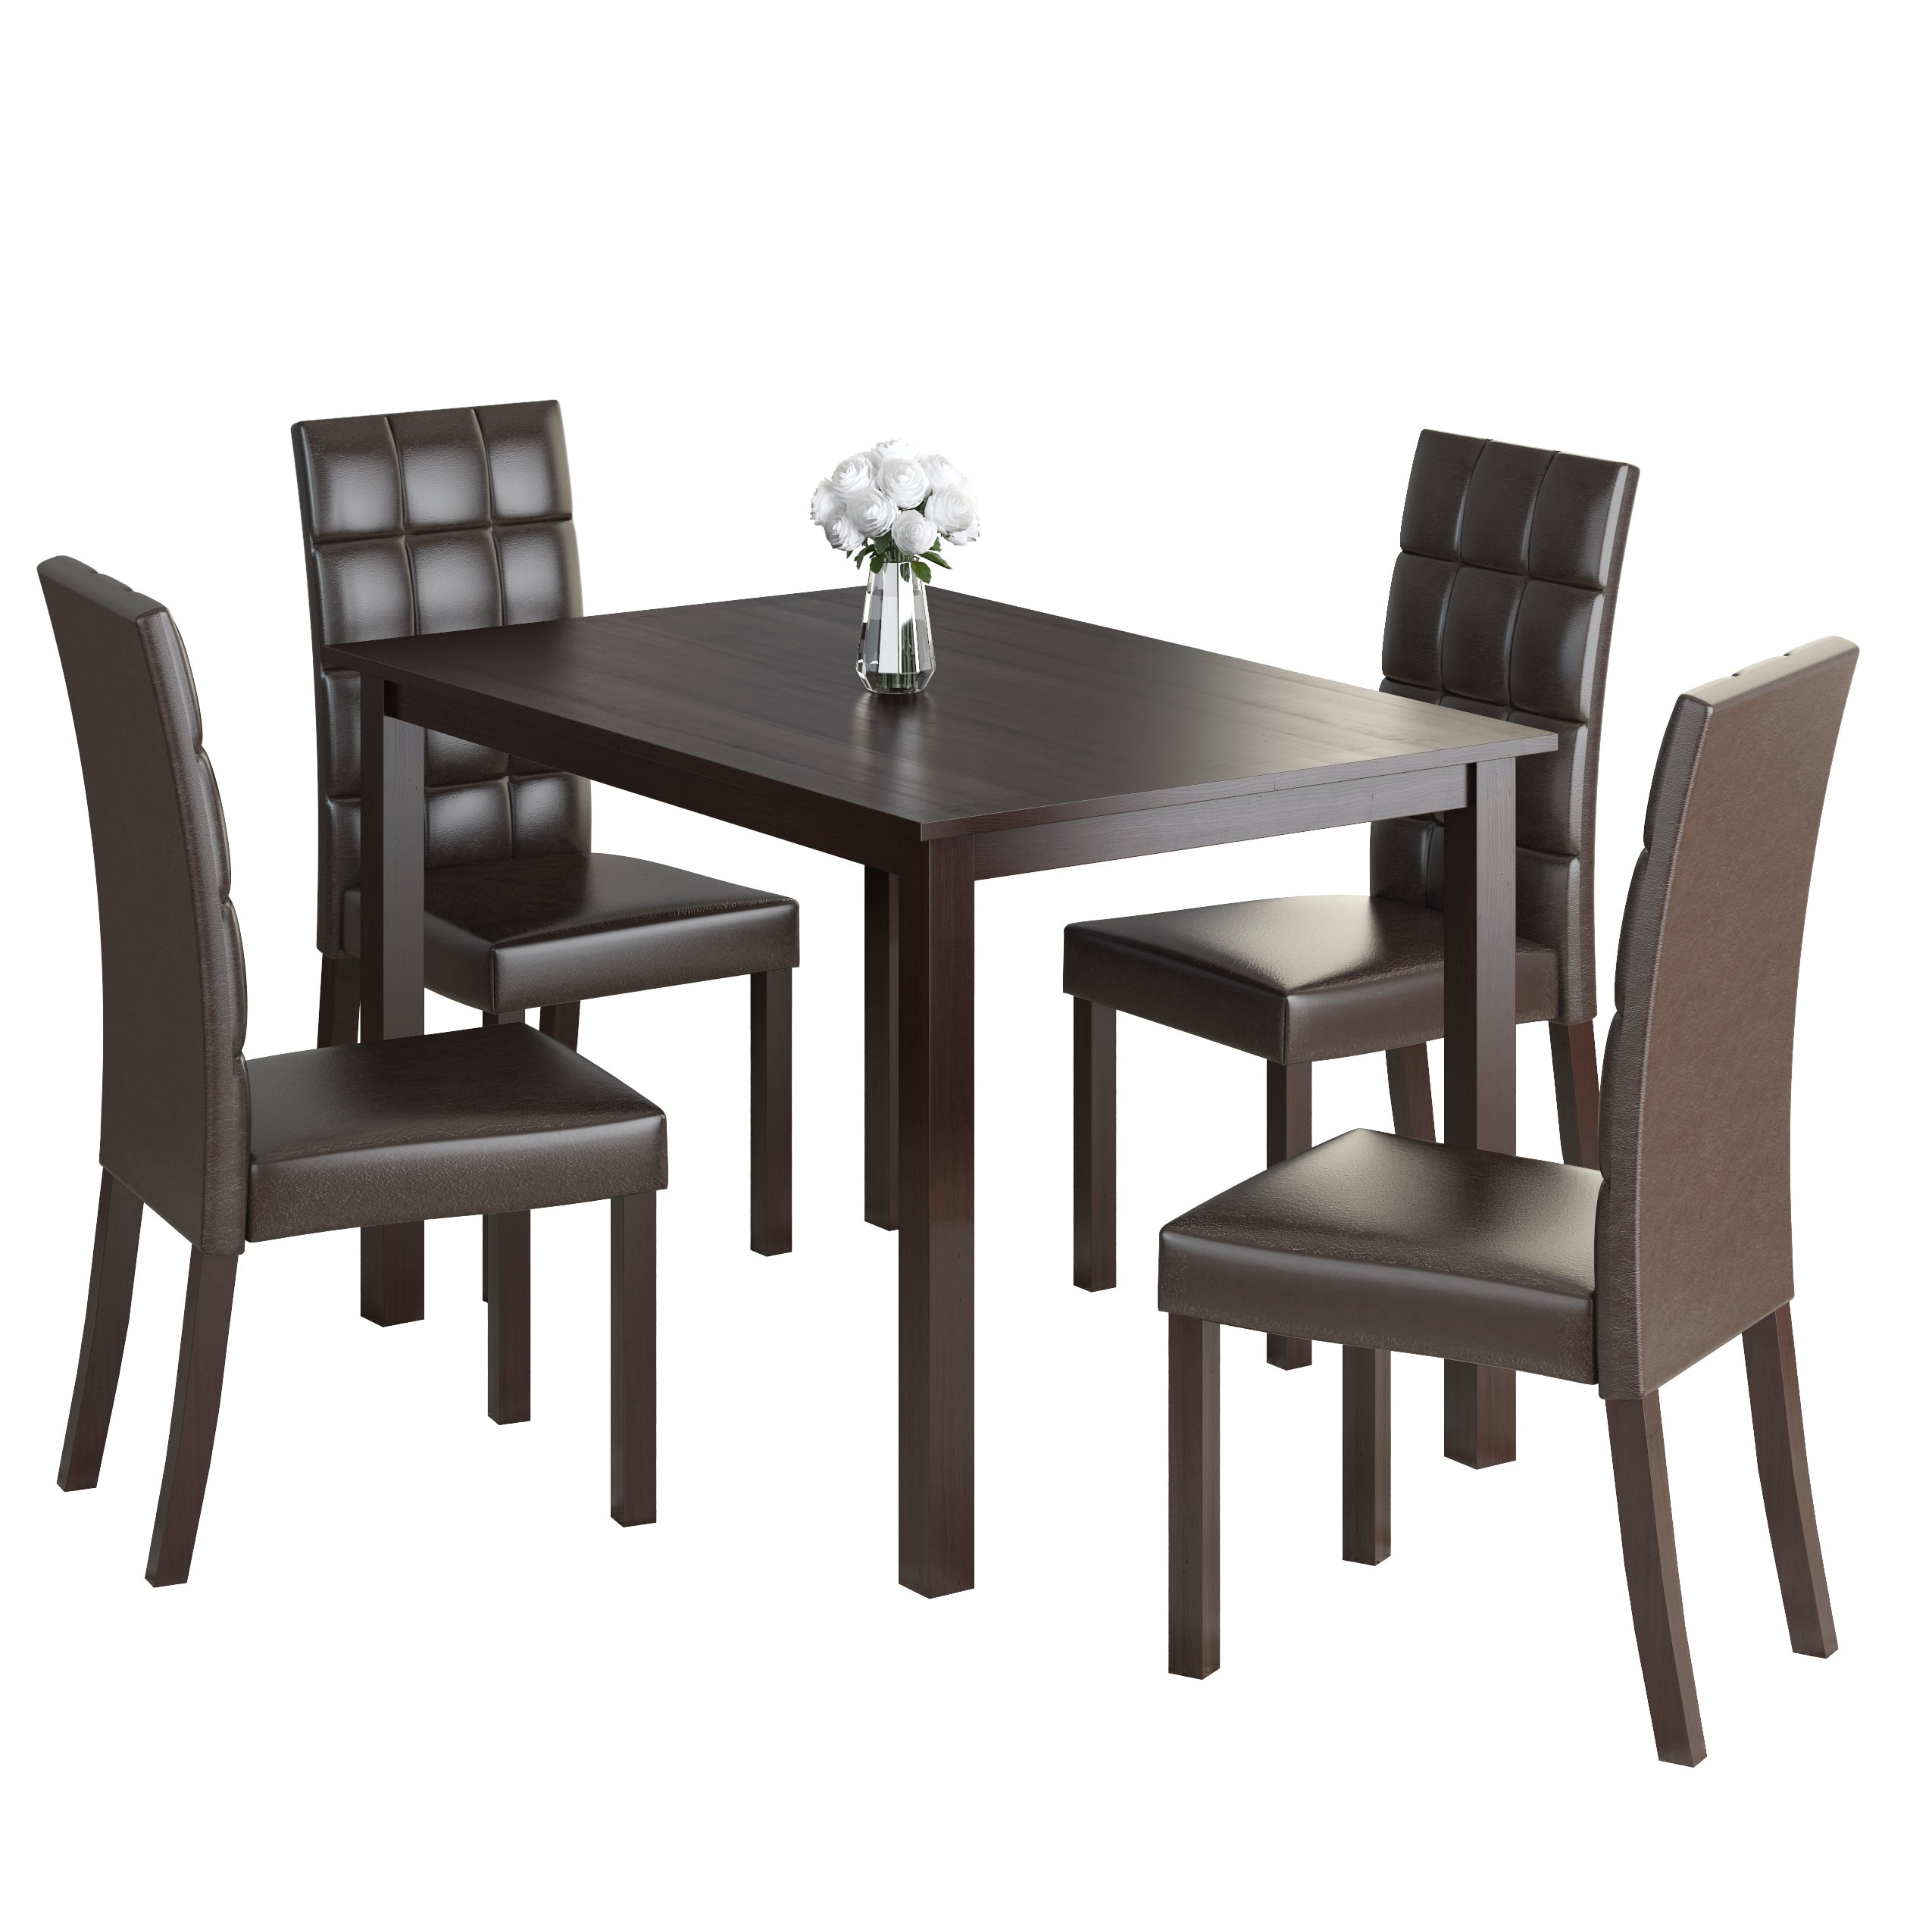 CorLiving Atwood Dining chairs Cappuccino 